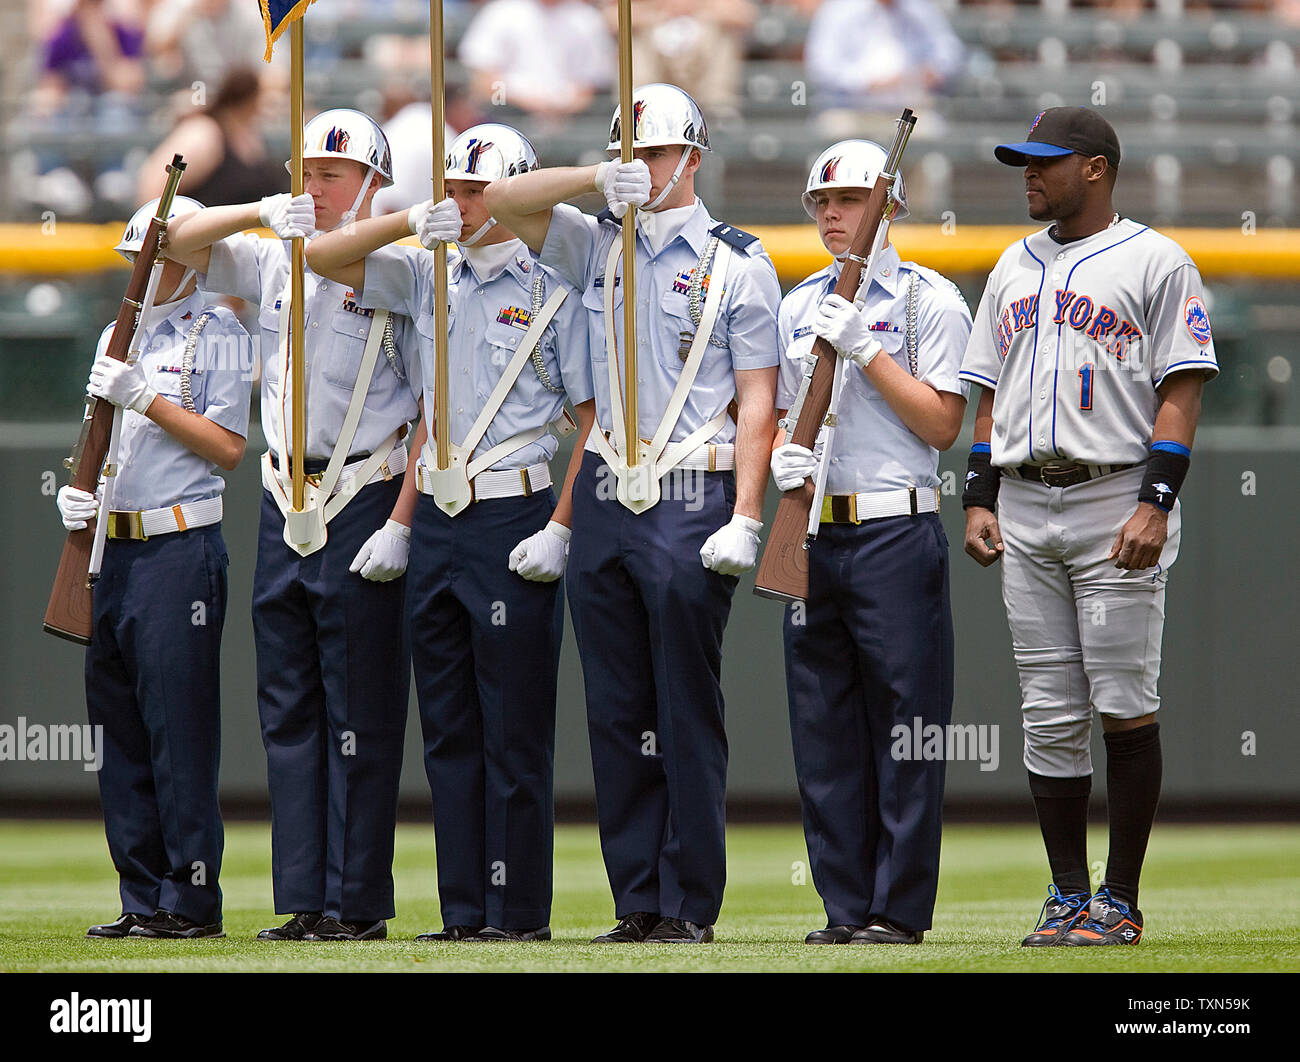 https://c8.alamy.com/comp/TXN59K/new-york-mets-second-baseman-luis-castillo-1-stands-with-the-united-states-civil-air-patrol-honor-guard-just-before-the-playing-of-the-national-anthem-at-coors-field-in-denver-on-may-25-2008-upi-photogary-c-caskey-TXN59K.jpg